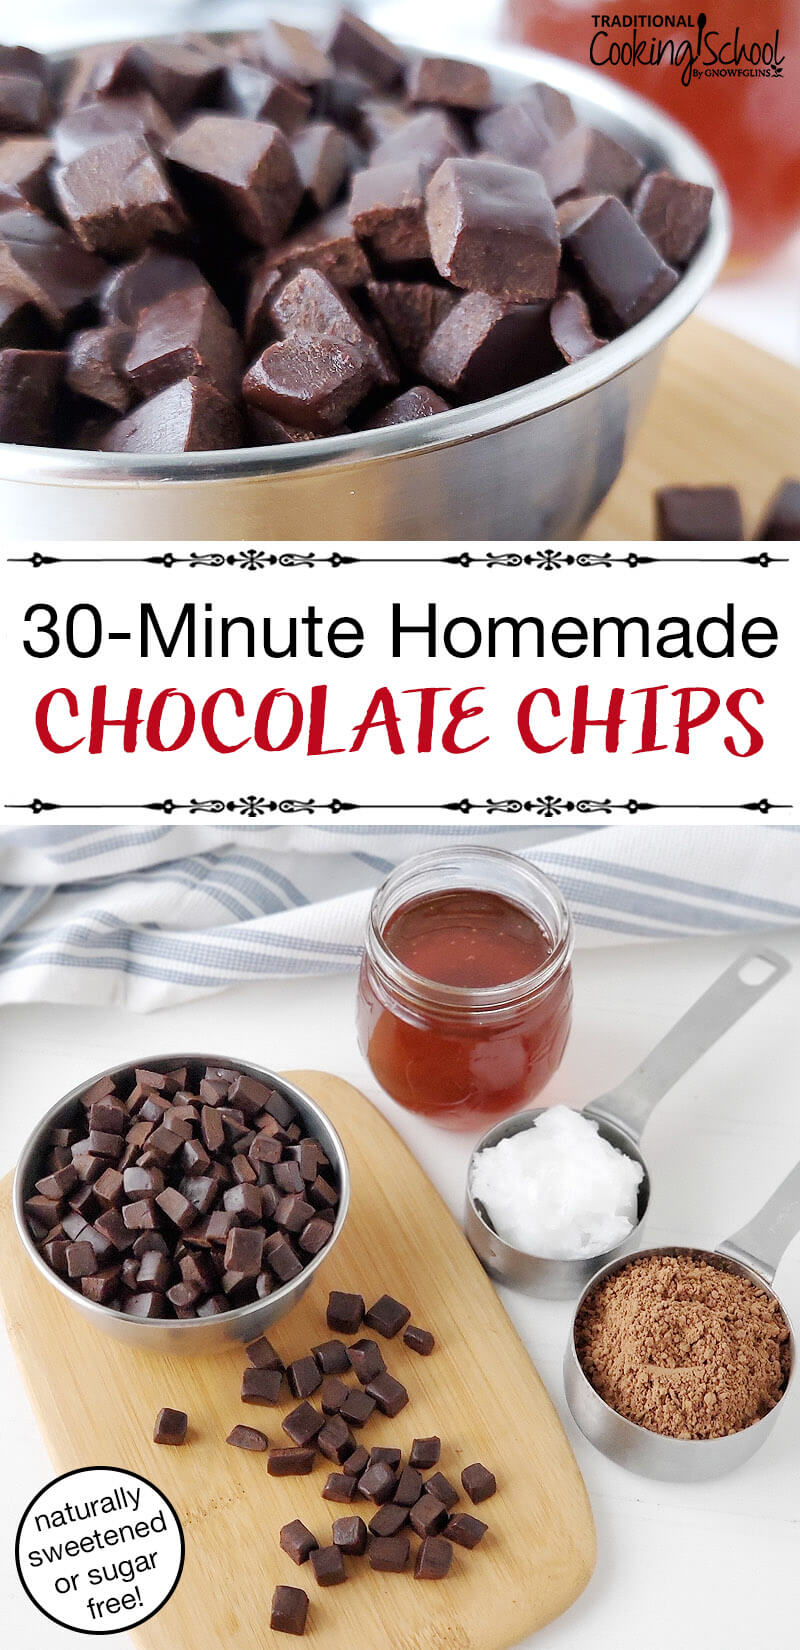 photo collage of making homemade chocolate, with text overlay: "30-Minute Homemade Chocolate Chips (naturally sweetened or sugar free!)"